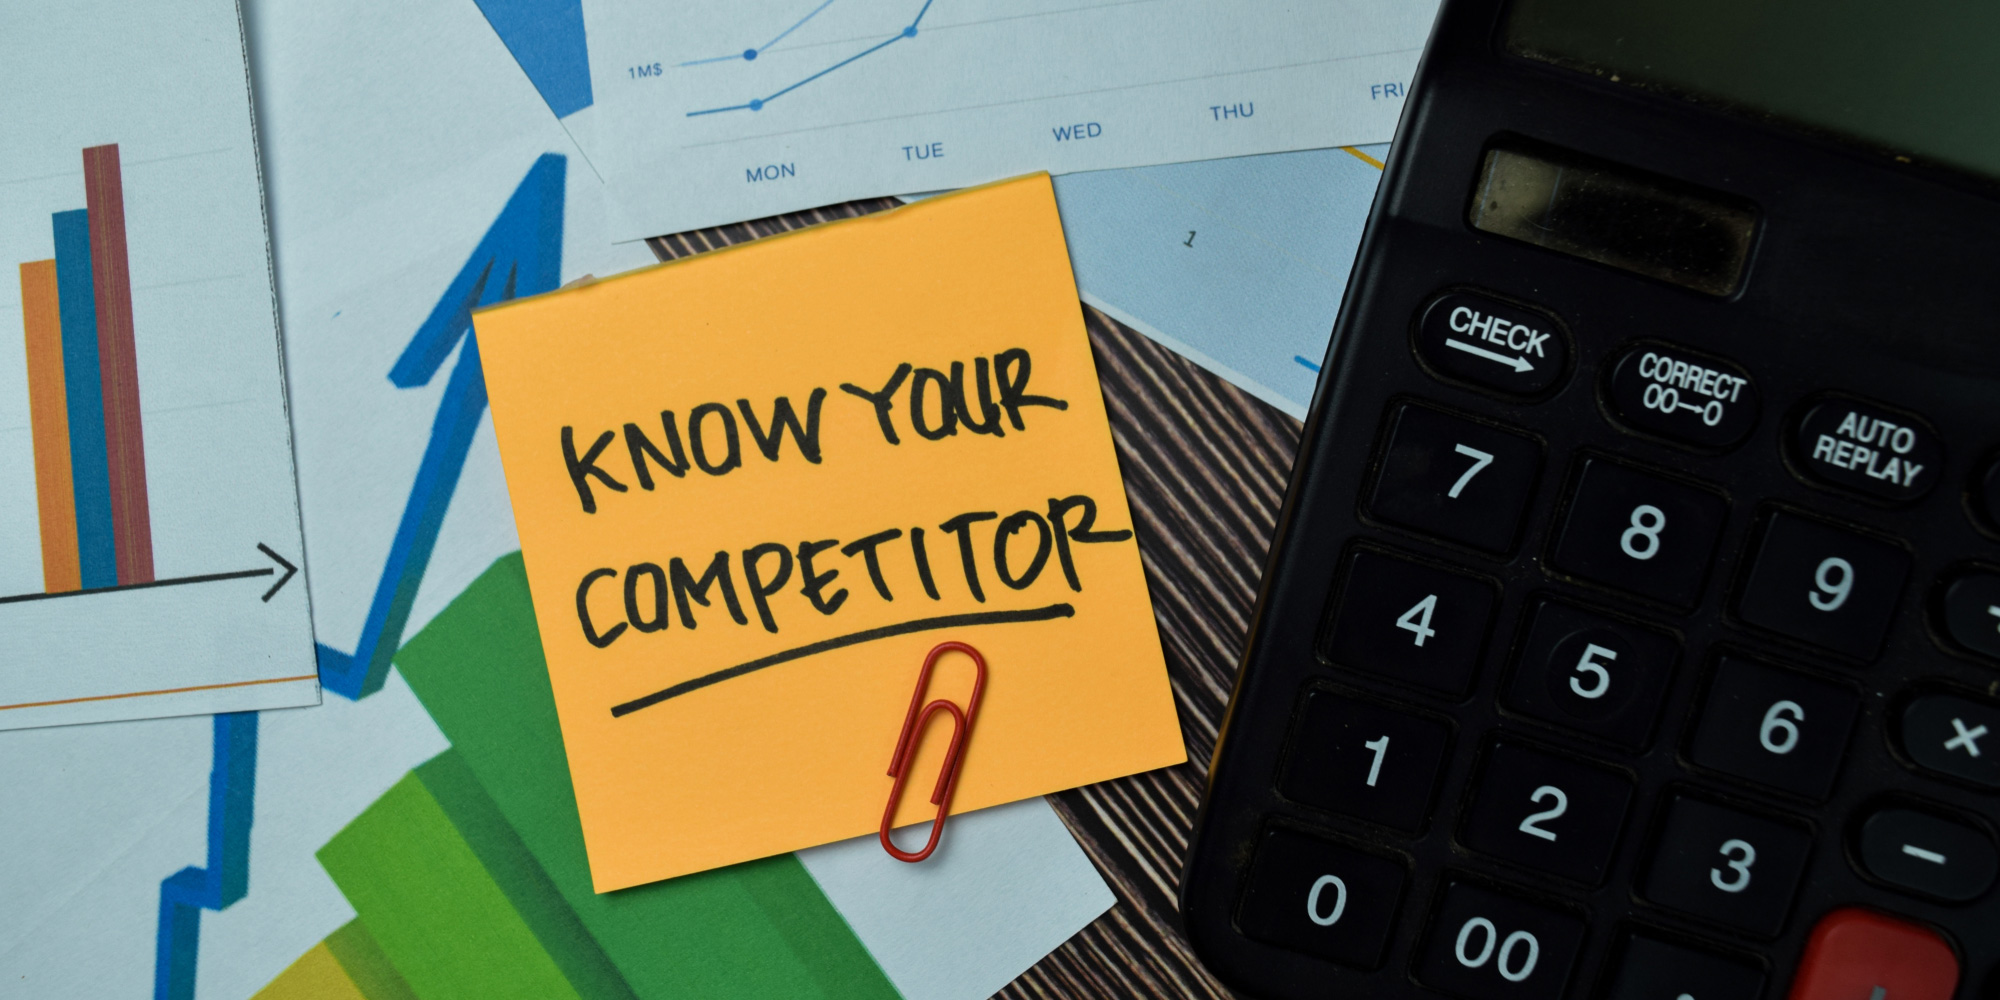 Keep track of your competitors